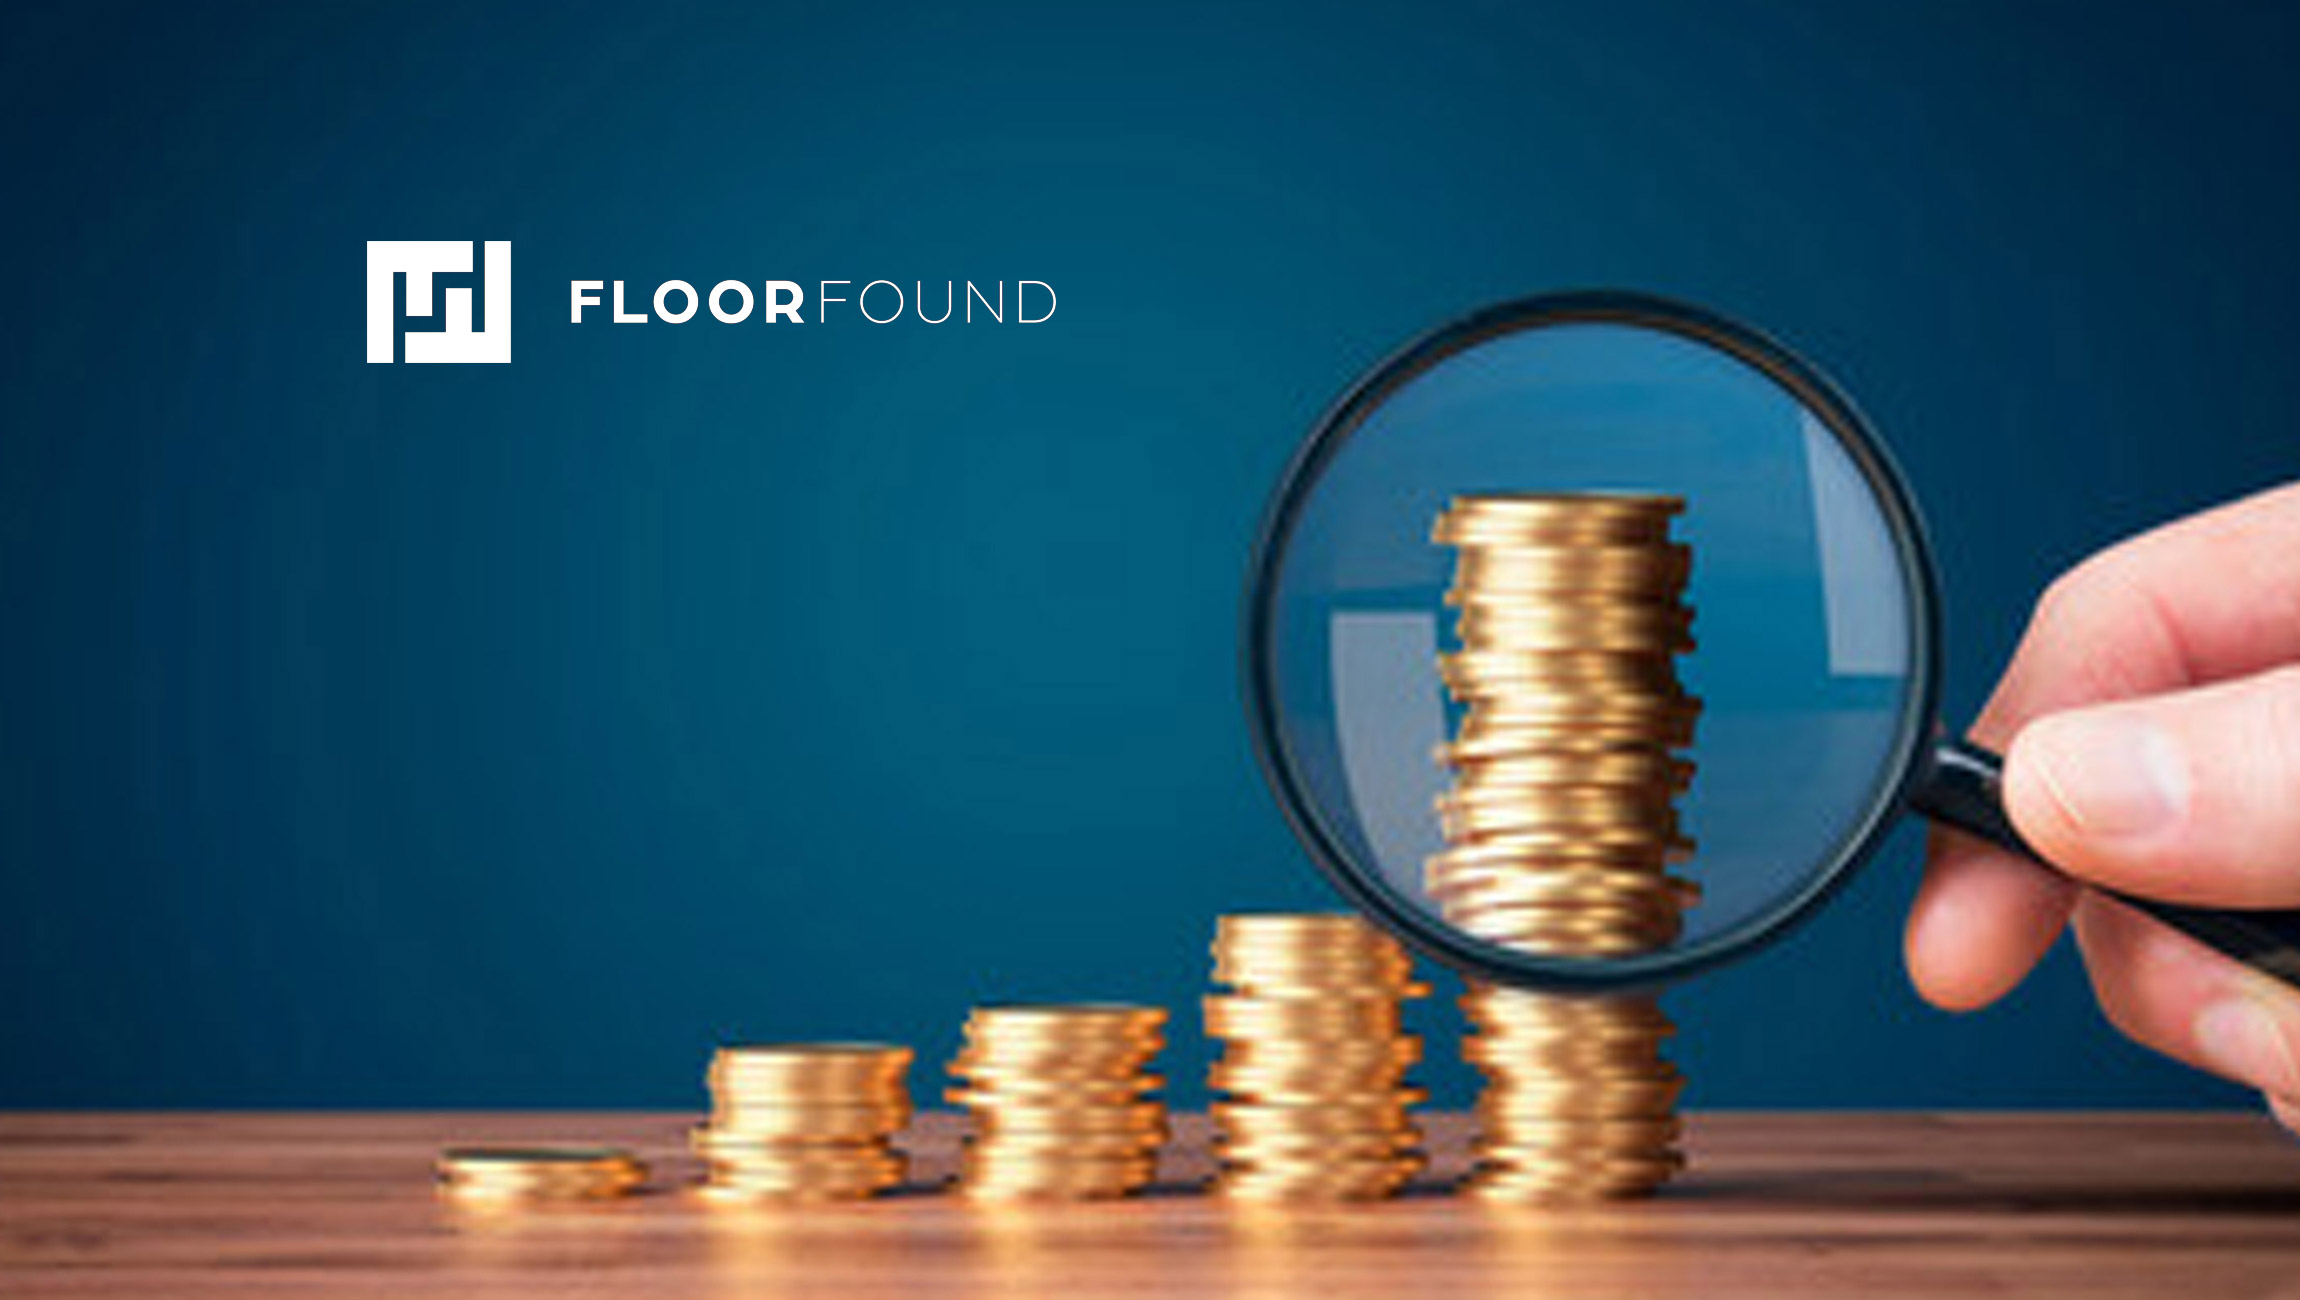 FloorFound-Secures-_10.5-Million-Series-A-to-Accelerate-Growth-_-Cement-Leadership-Position-in-Oversized-Recommerce